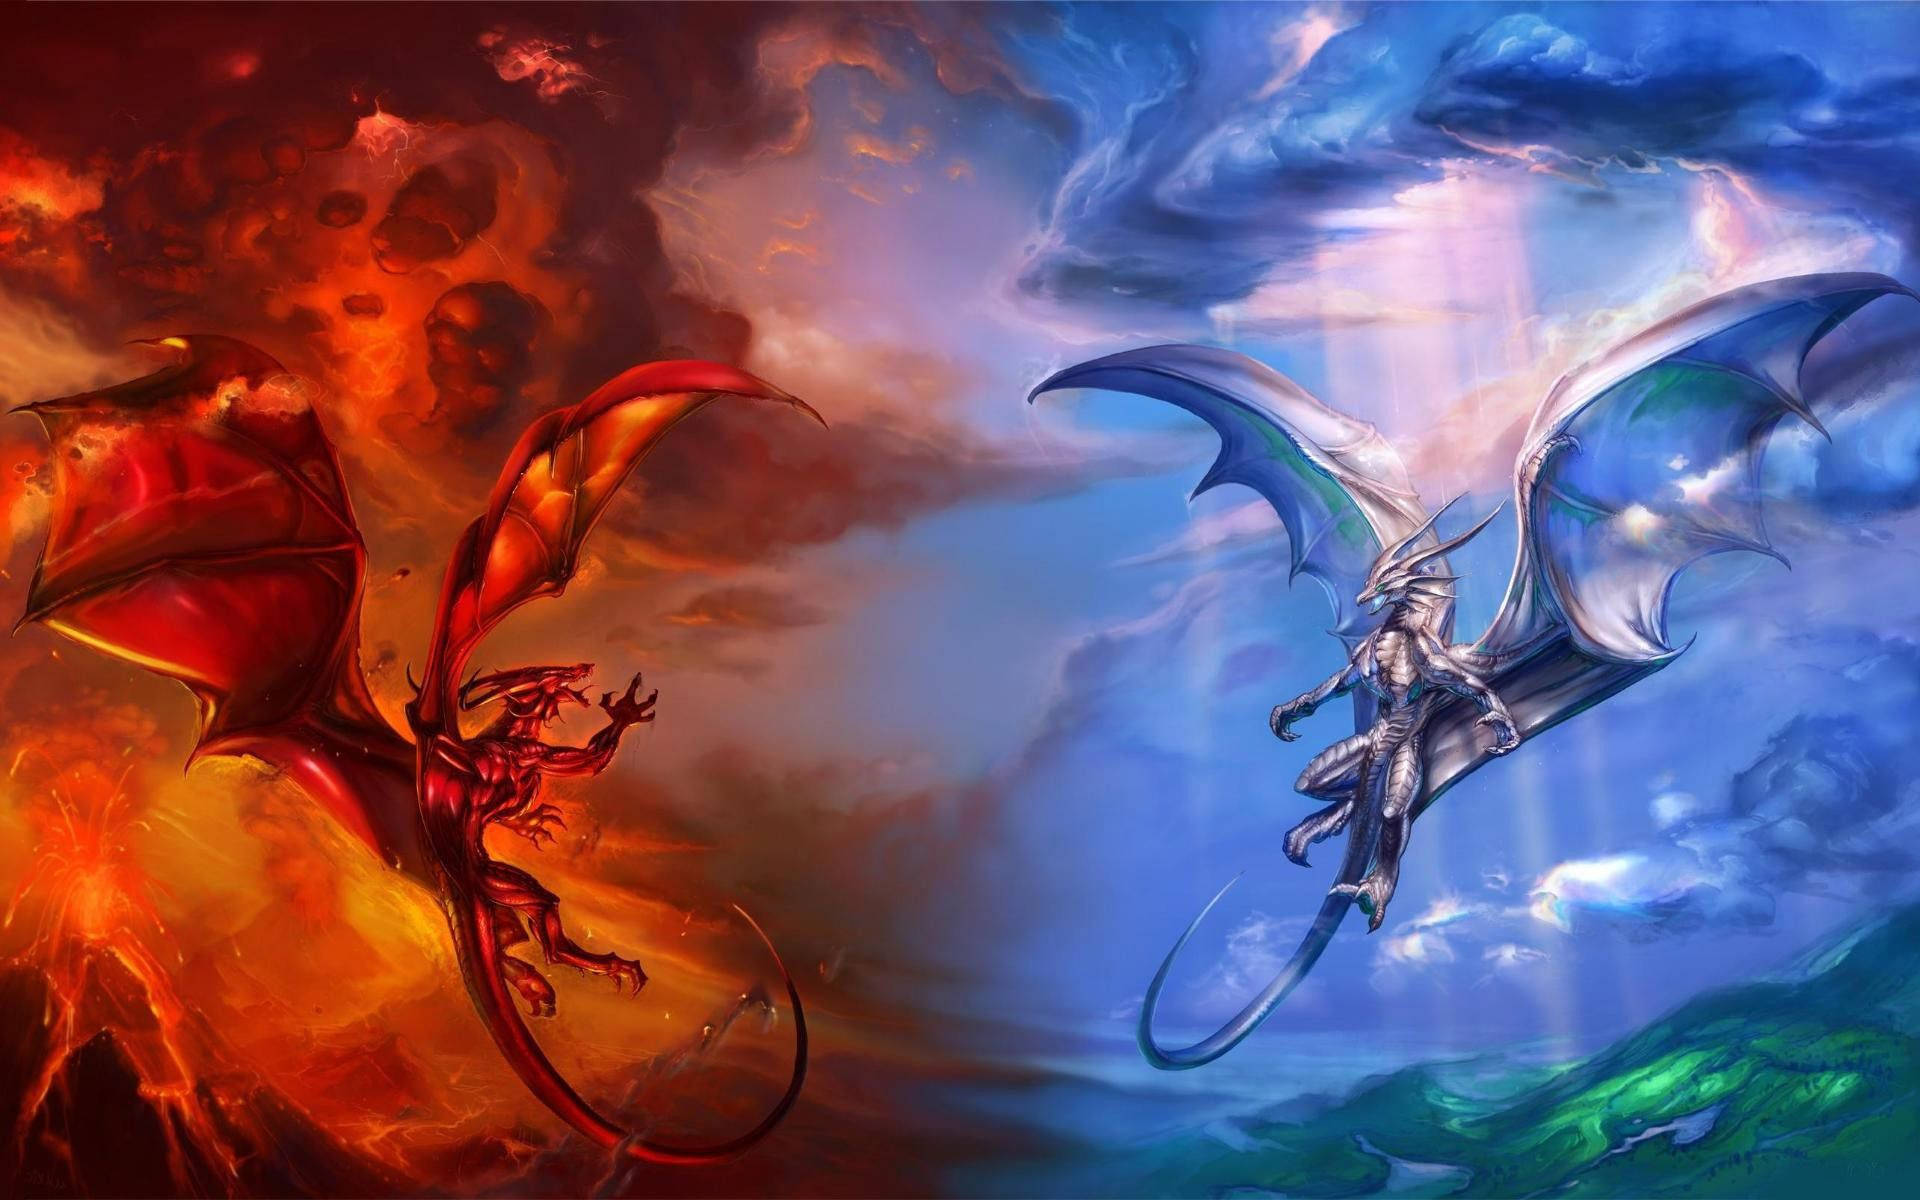 fire dragons vs water dragons